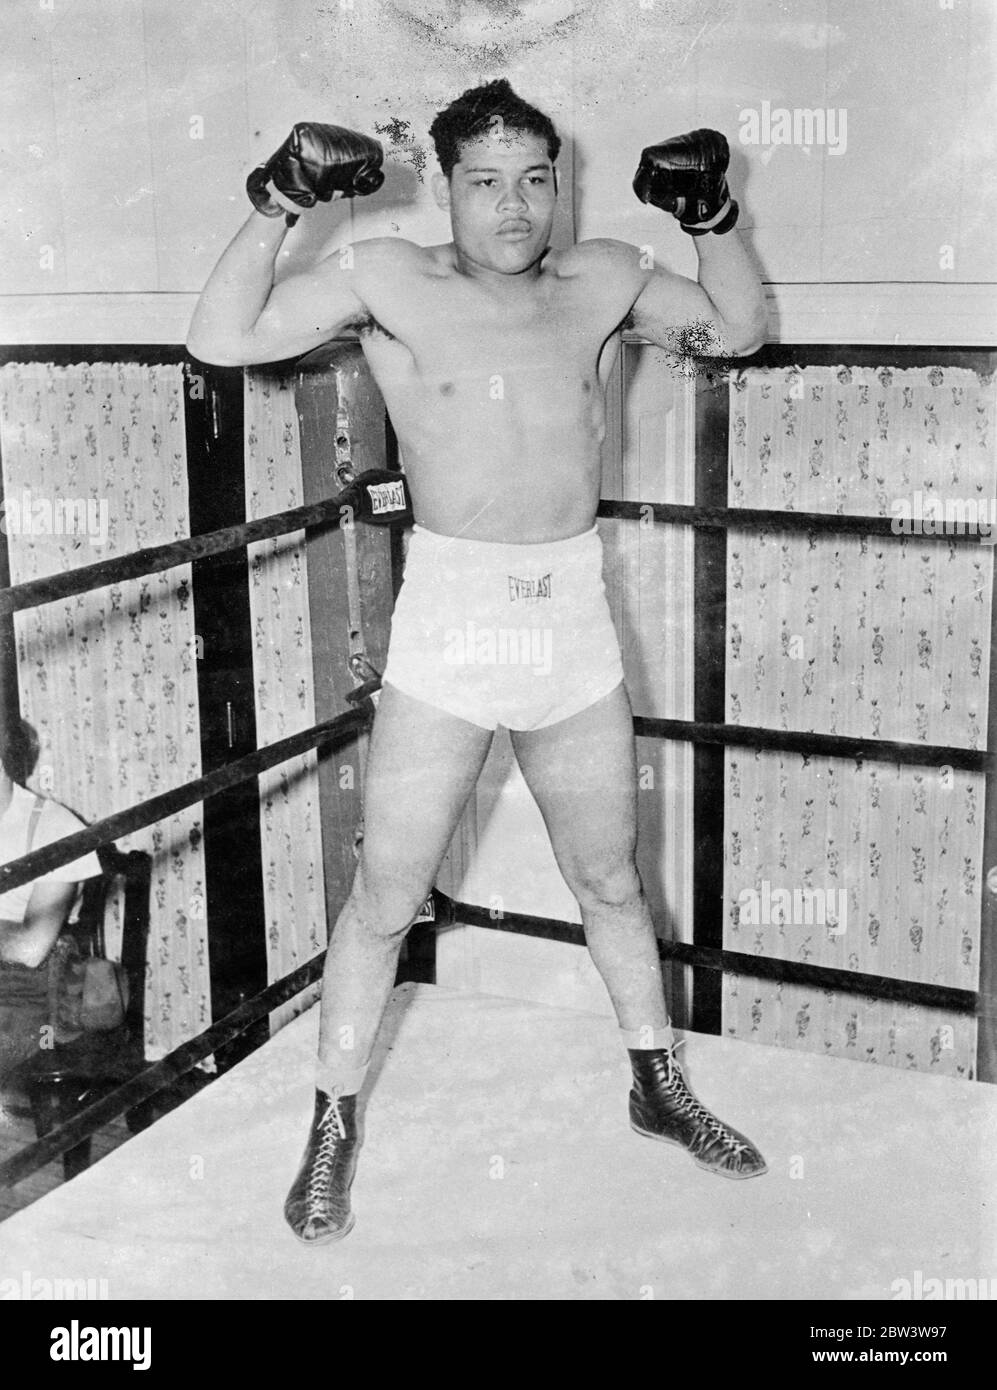 Brown bomber , Louis and Max Schneling meet tomorrow night . Tomorrow night ( Thursday ) , Joe Louis , America ' s ' Brown Bomber ' , and Max Schmeling of Germany , former heavyweight champion of the world meet at the Yankee Stadium , New York , in a fight which will probaly give the victor the right to meet James J Braddock for the world title . Although Louis is the favourite experts predict that Schmelling is capablle of putting up a stiff resistence . Photo shows , a new picture of Joe Louis , America ' s ' Brown Bomber ' in his gymnasium during training for his fight . 17 June 1936 Stock Photo